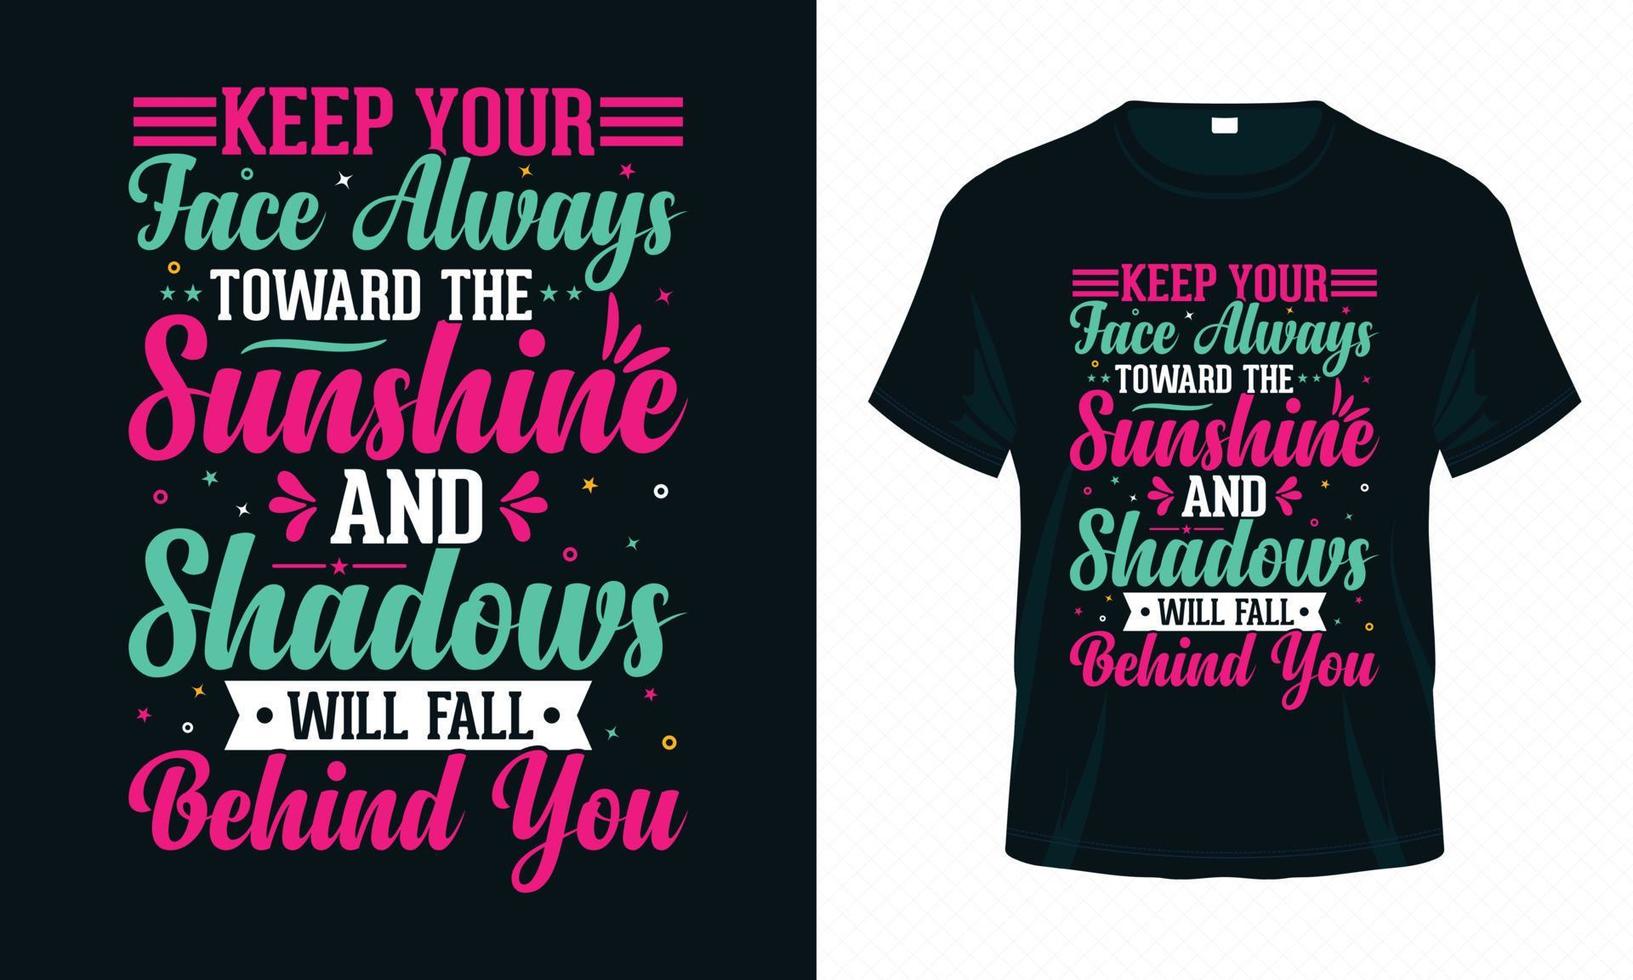 Keep Your Face Always Toward the Sunshine-Motivational Typography T-shirt Design Vector. Inspirational Quotes Good for Clothes, Greeting Card, Poster, Tote Bag and Mug Design. vector